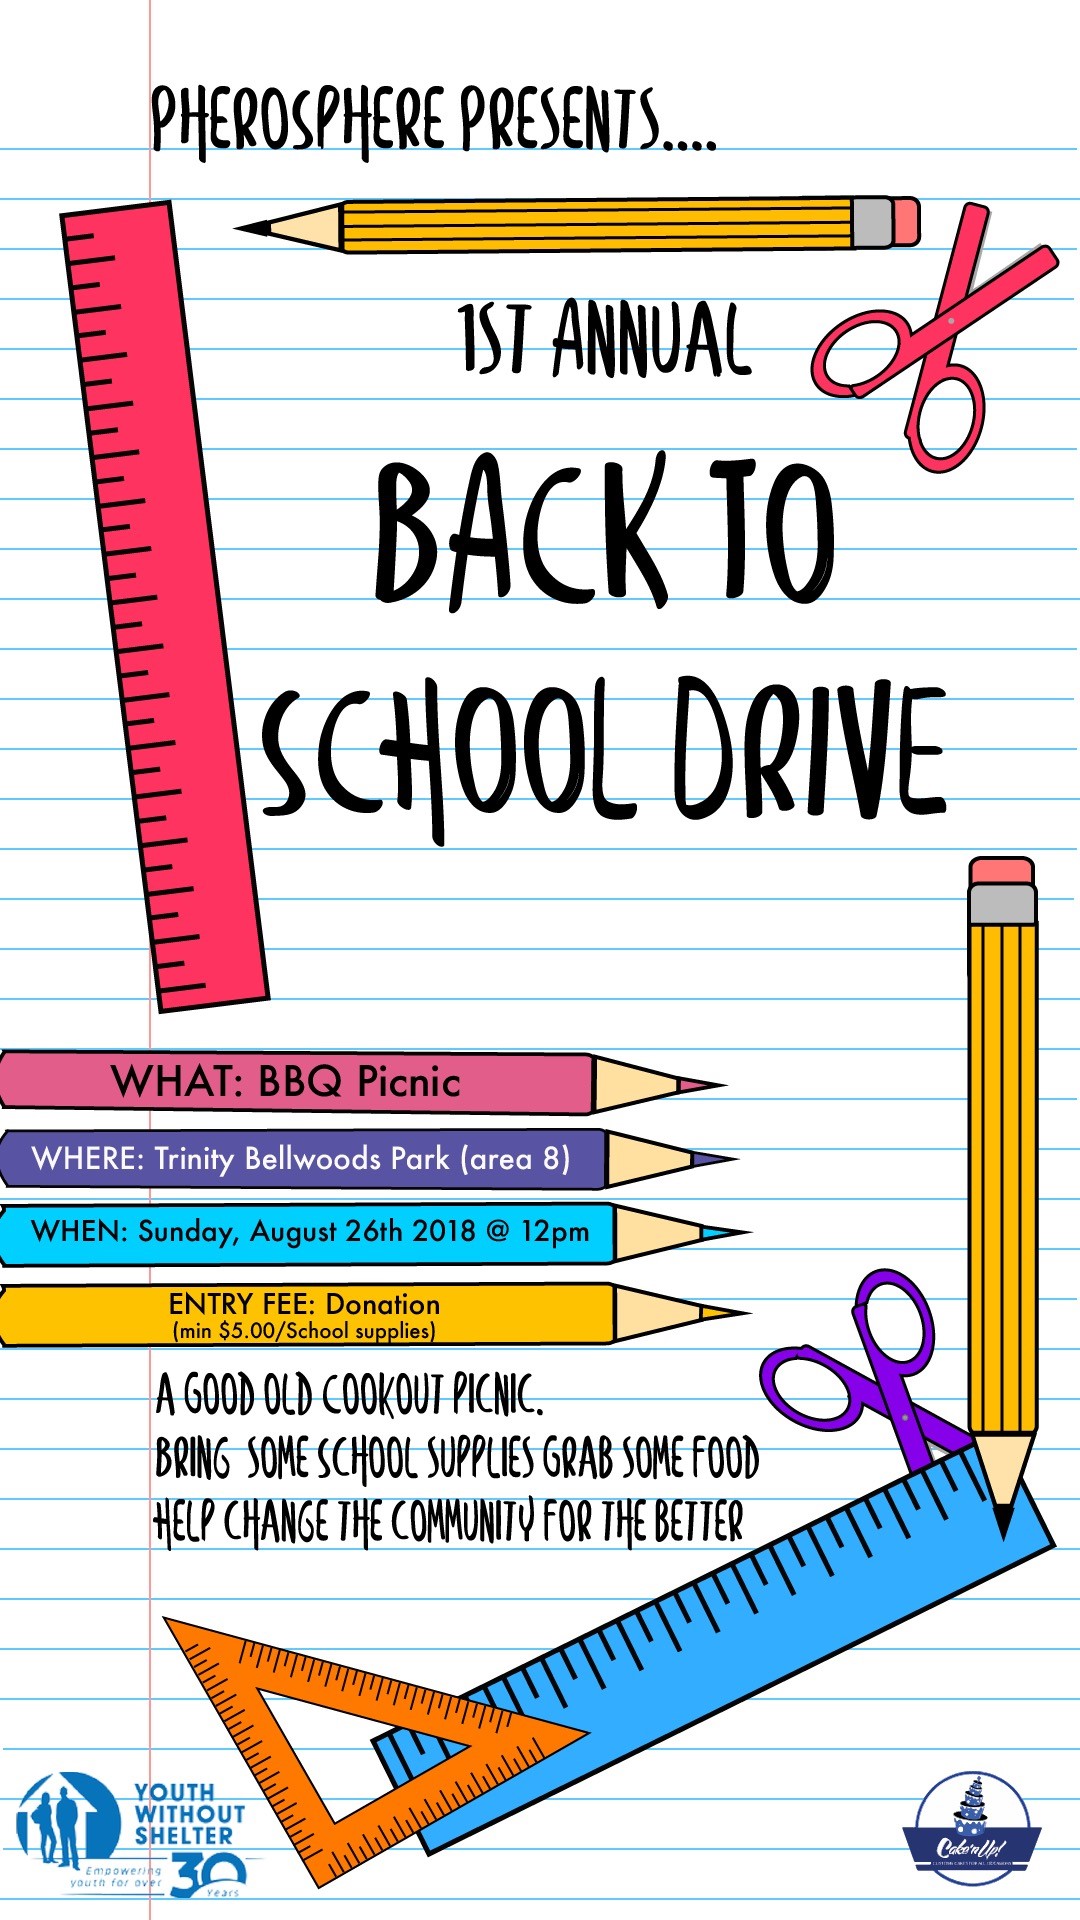 Pherosphere Presents The 1st Annual Back To School Drive - image